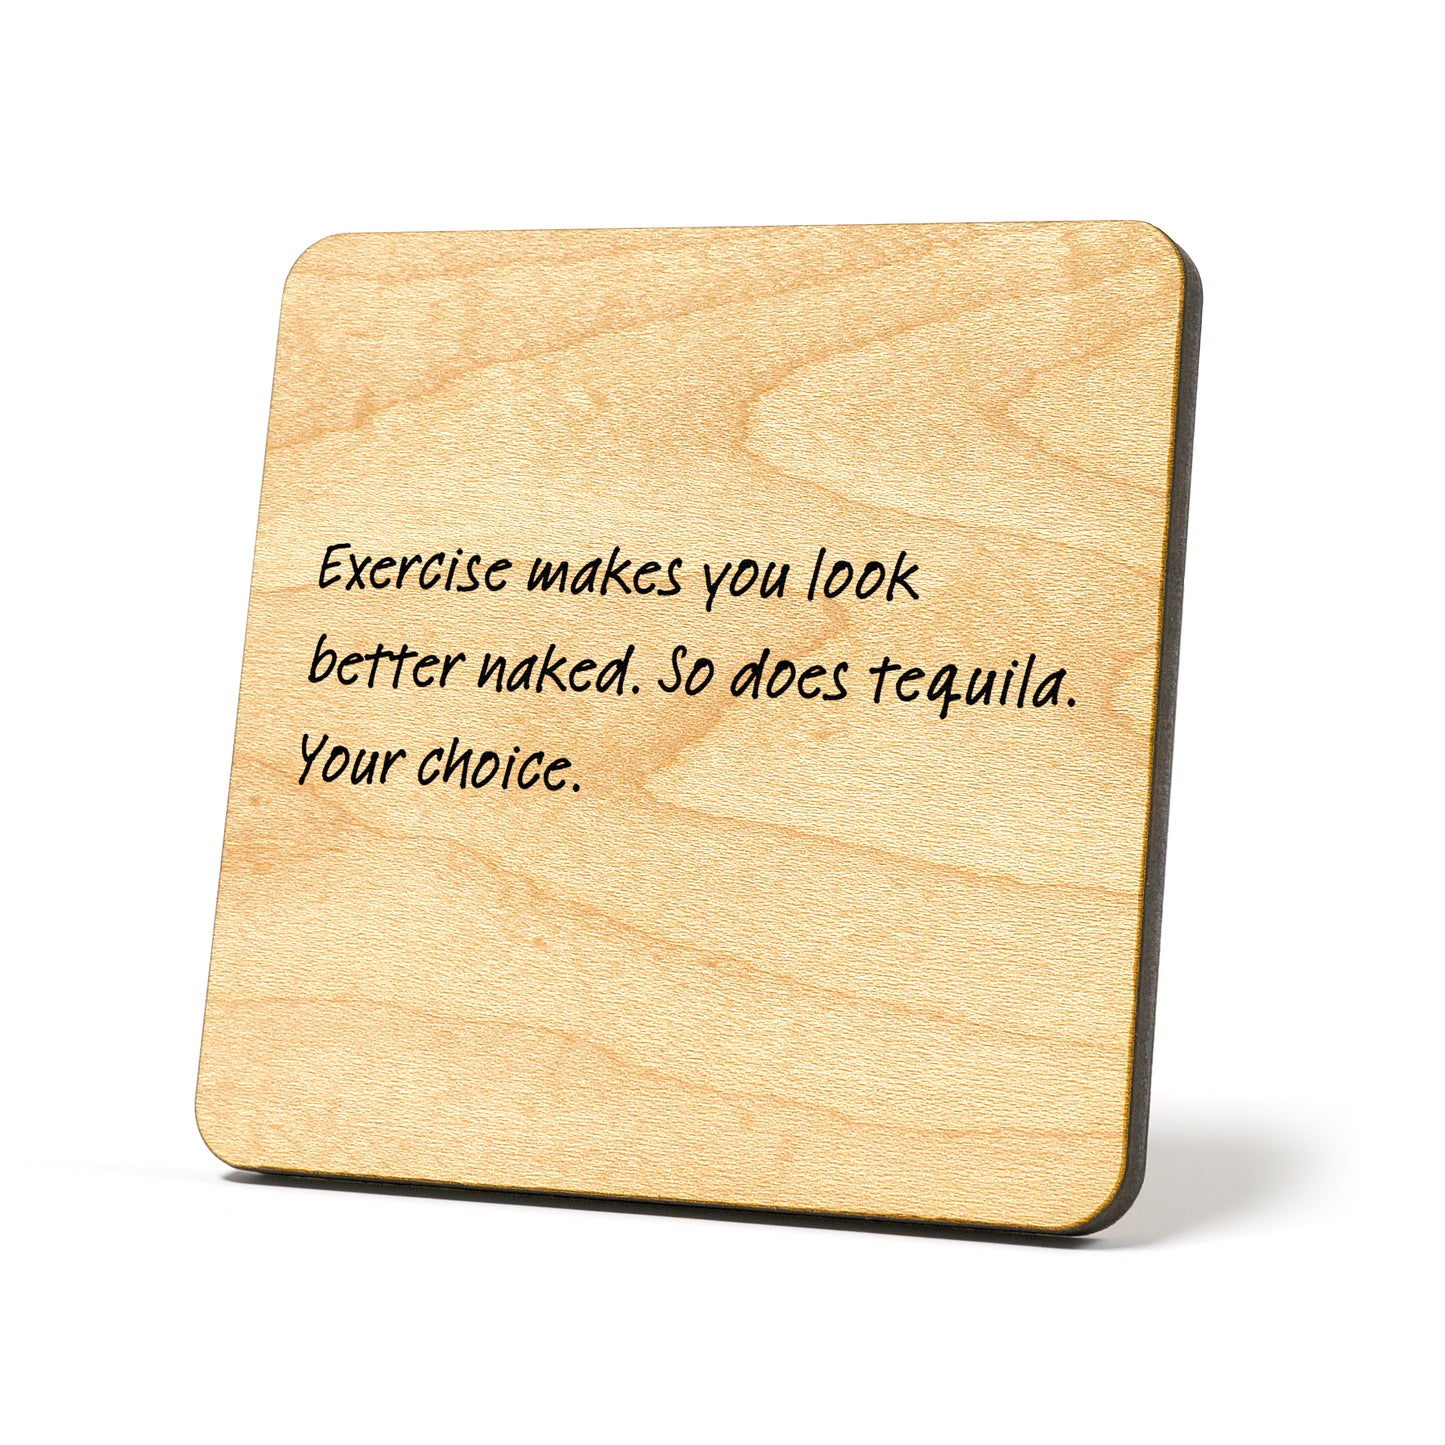 Exercise makes you look better Quote Coaster